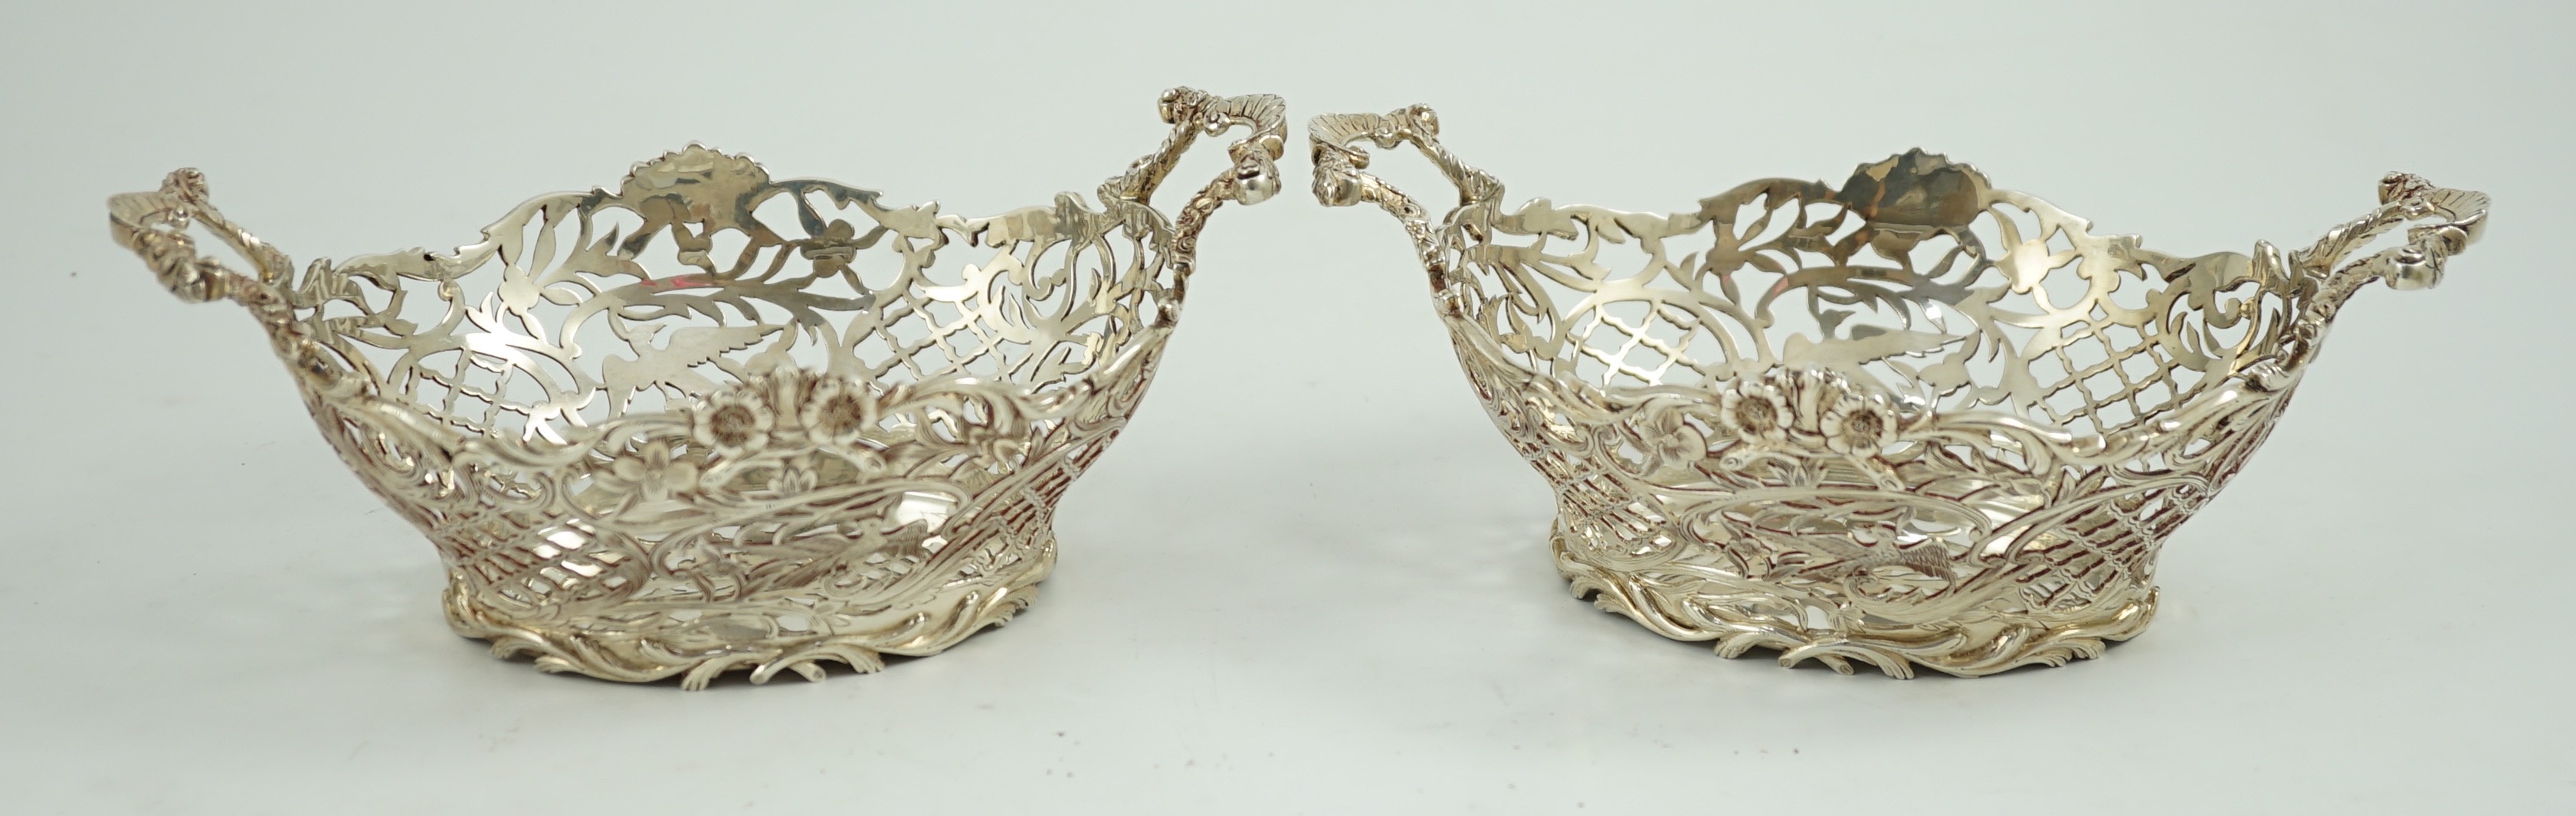 A pair of Edwardian pierced silver two handled bon bon dishes, by William Comyns